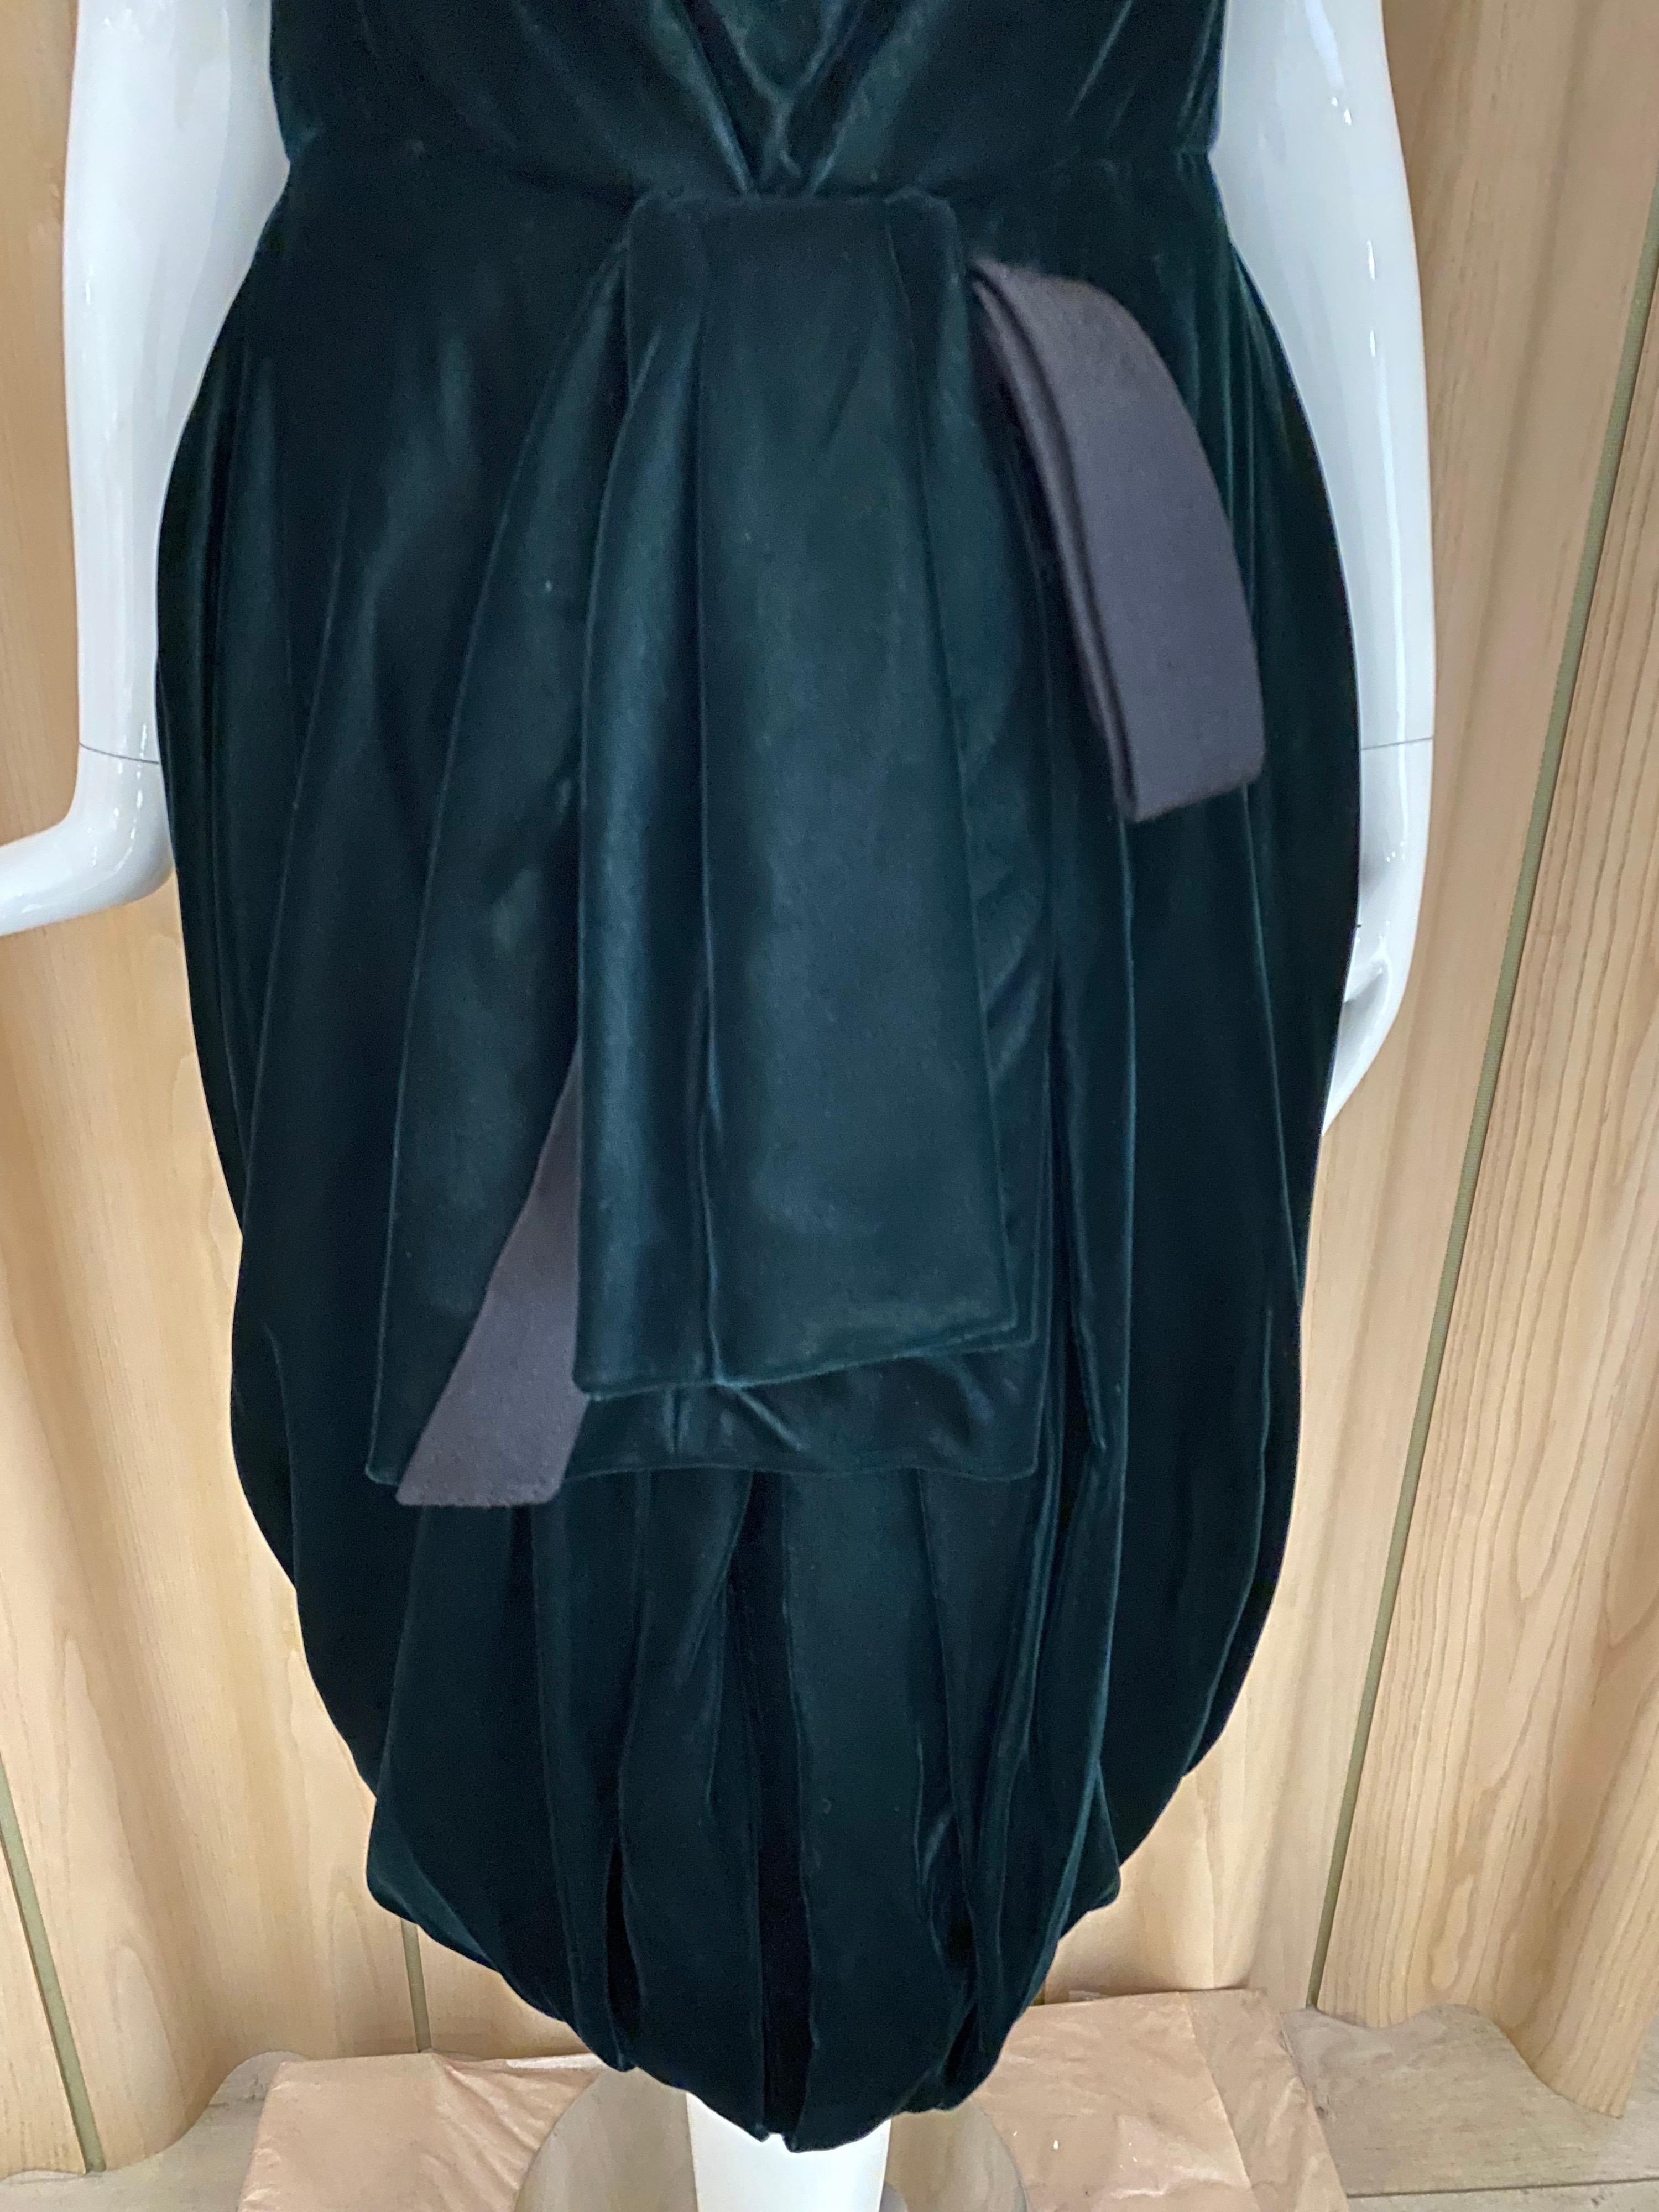 Gianfranco Ferrè Green Velvet Strapless Cocktail Dress In New Condition For Sale In Beverly Hills, CA